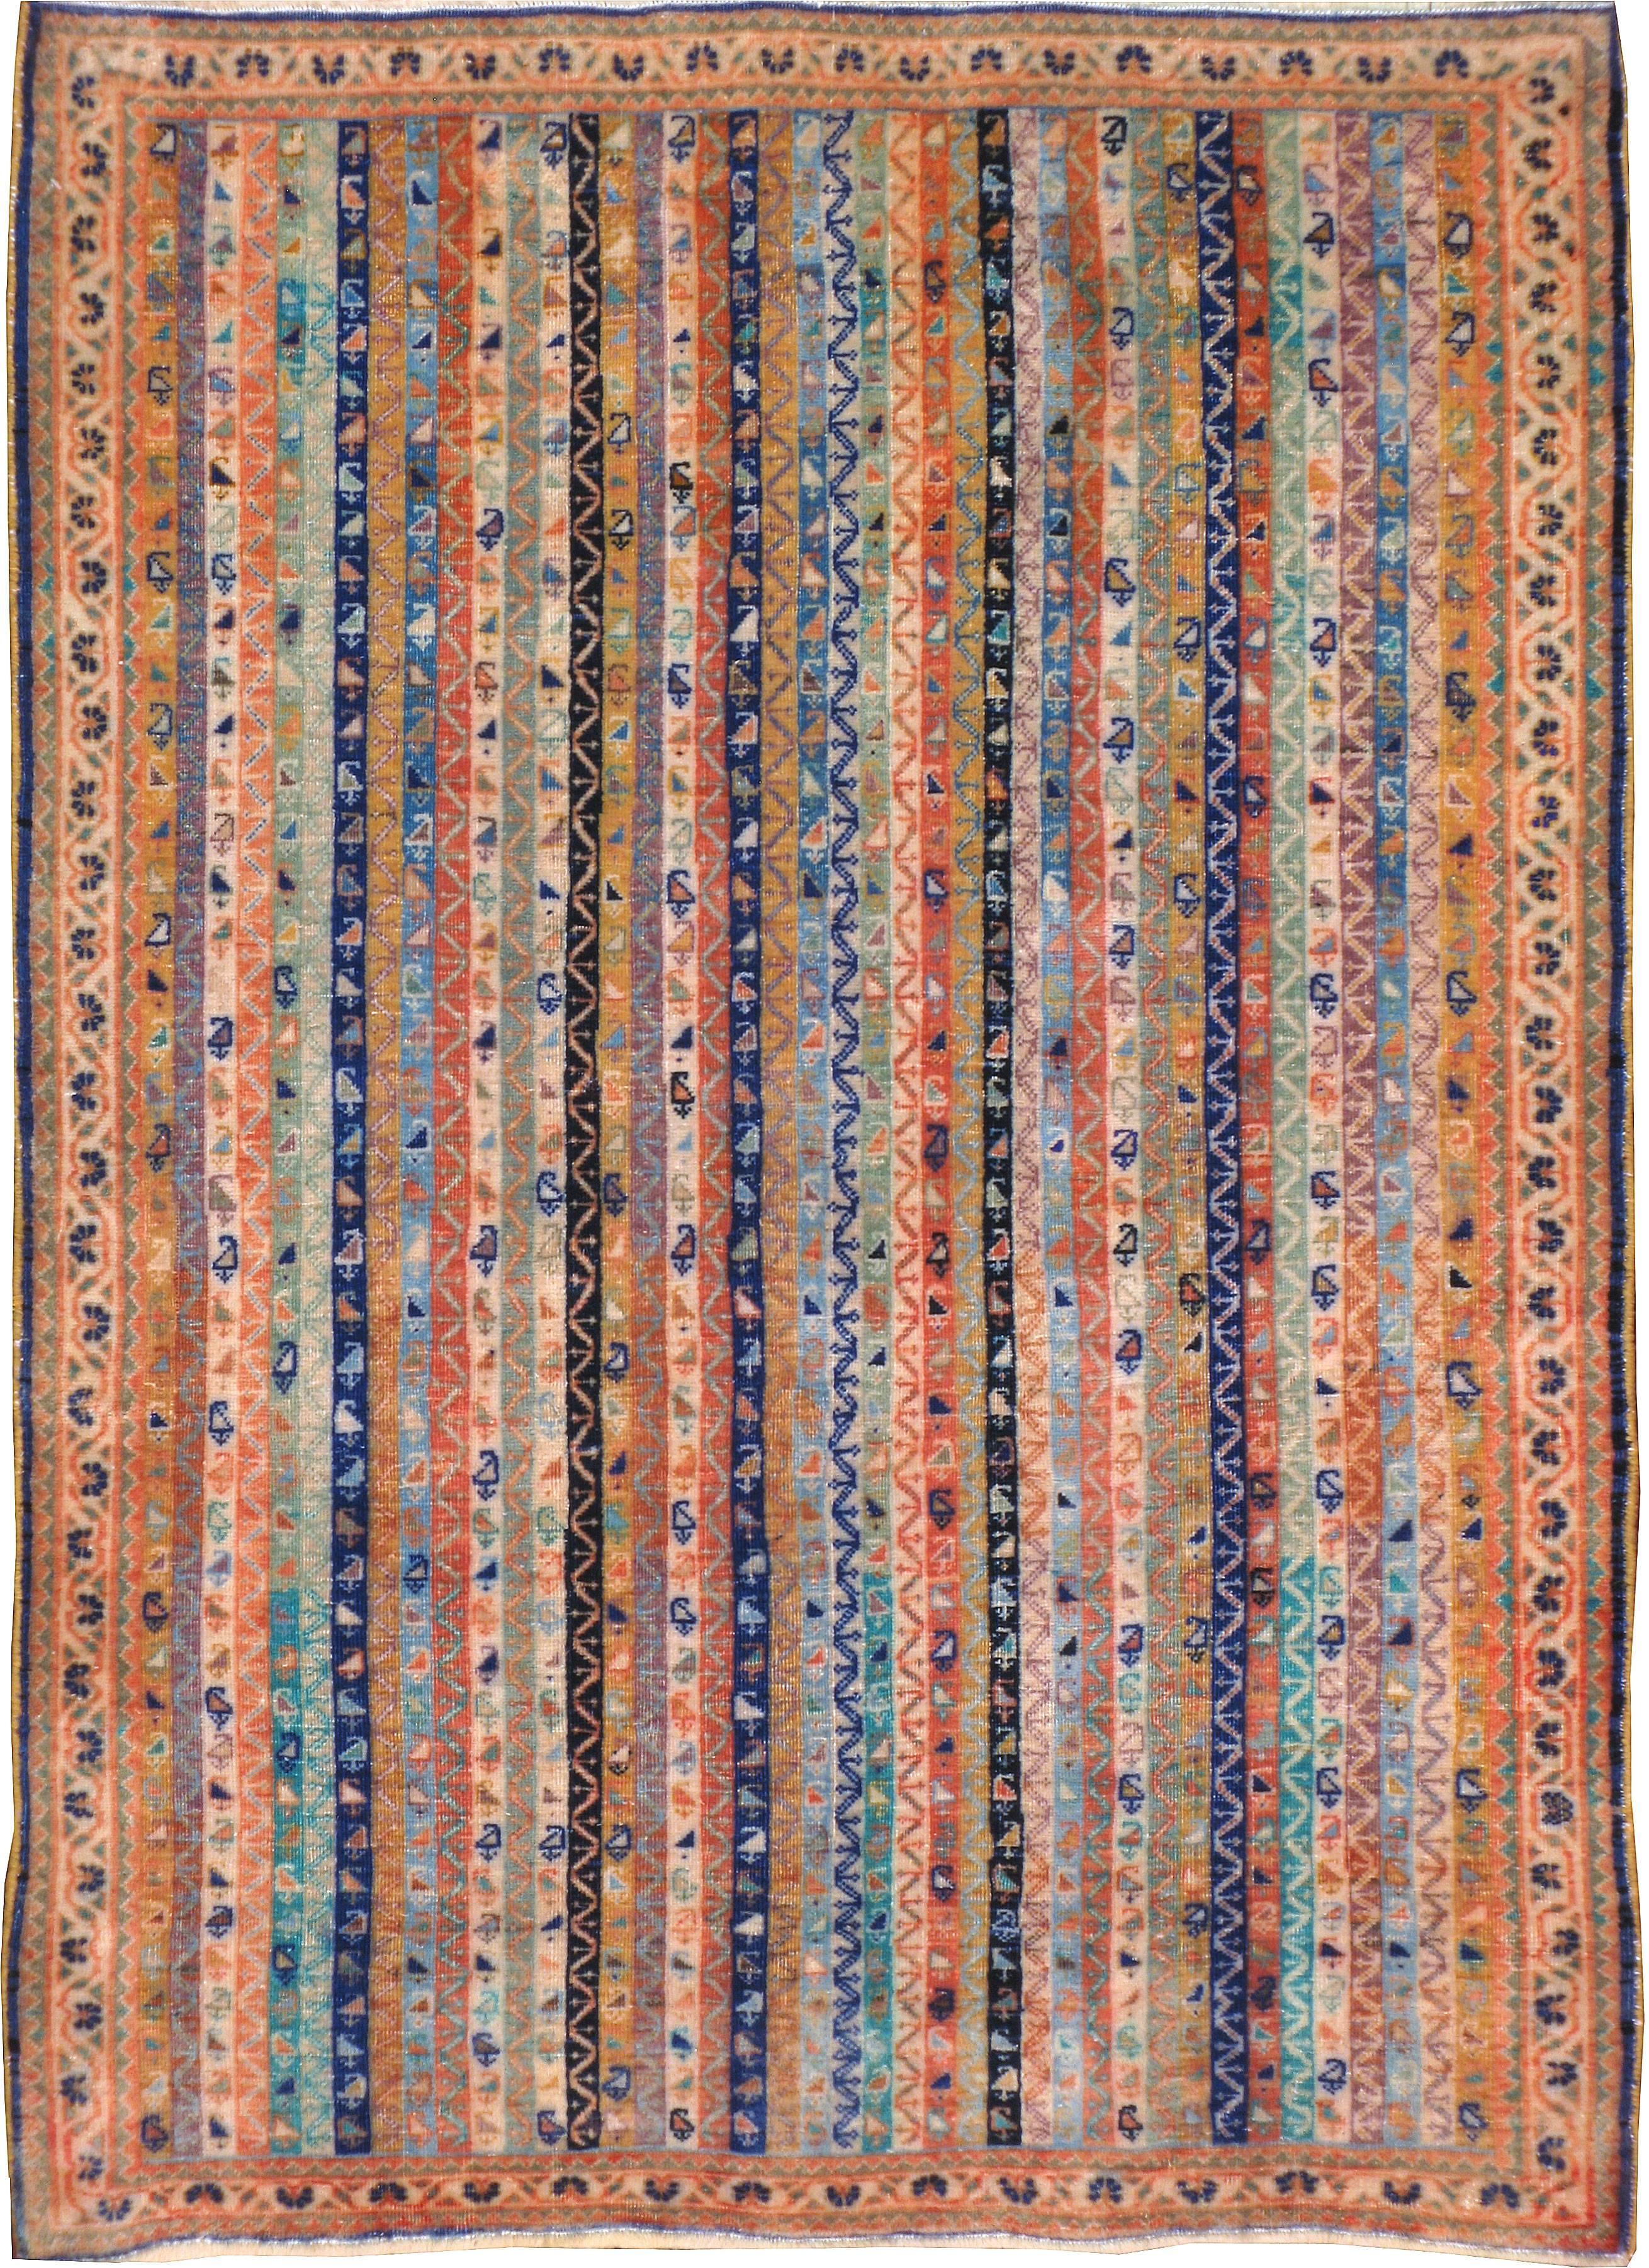 An antique Persian Afshar rug from the second quarter of the 20th century.